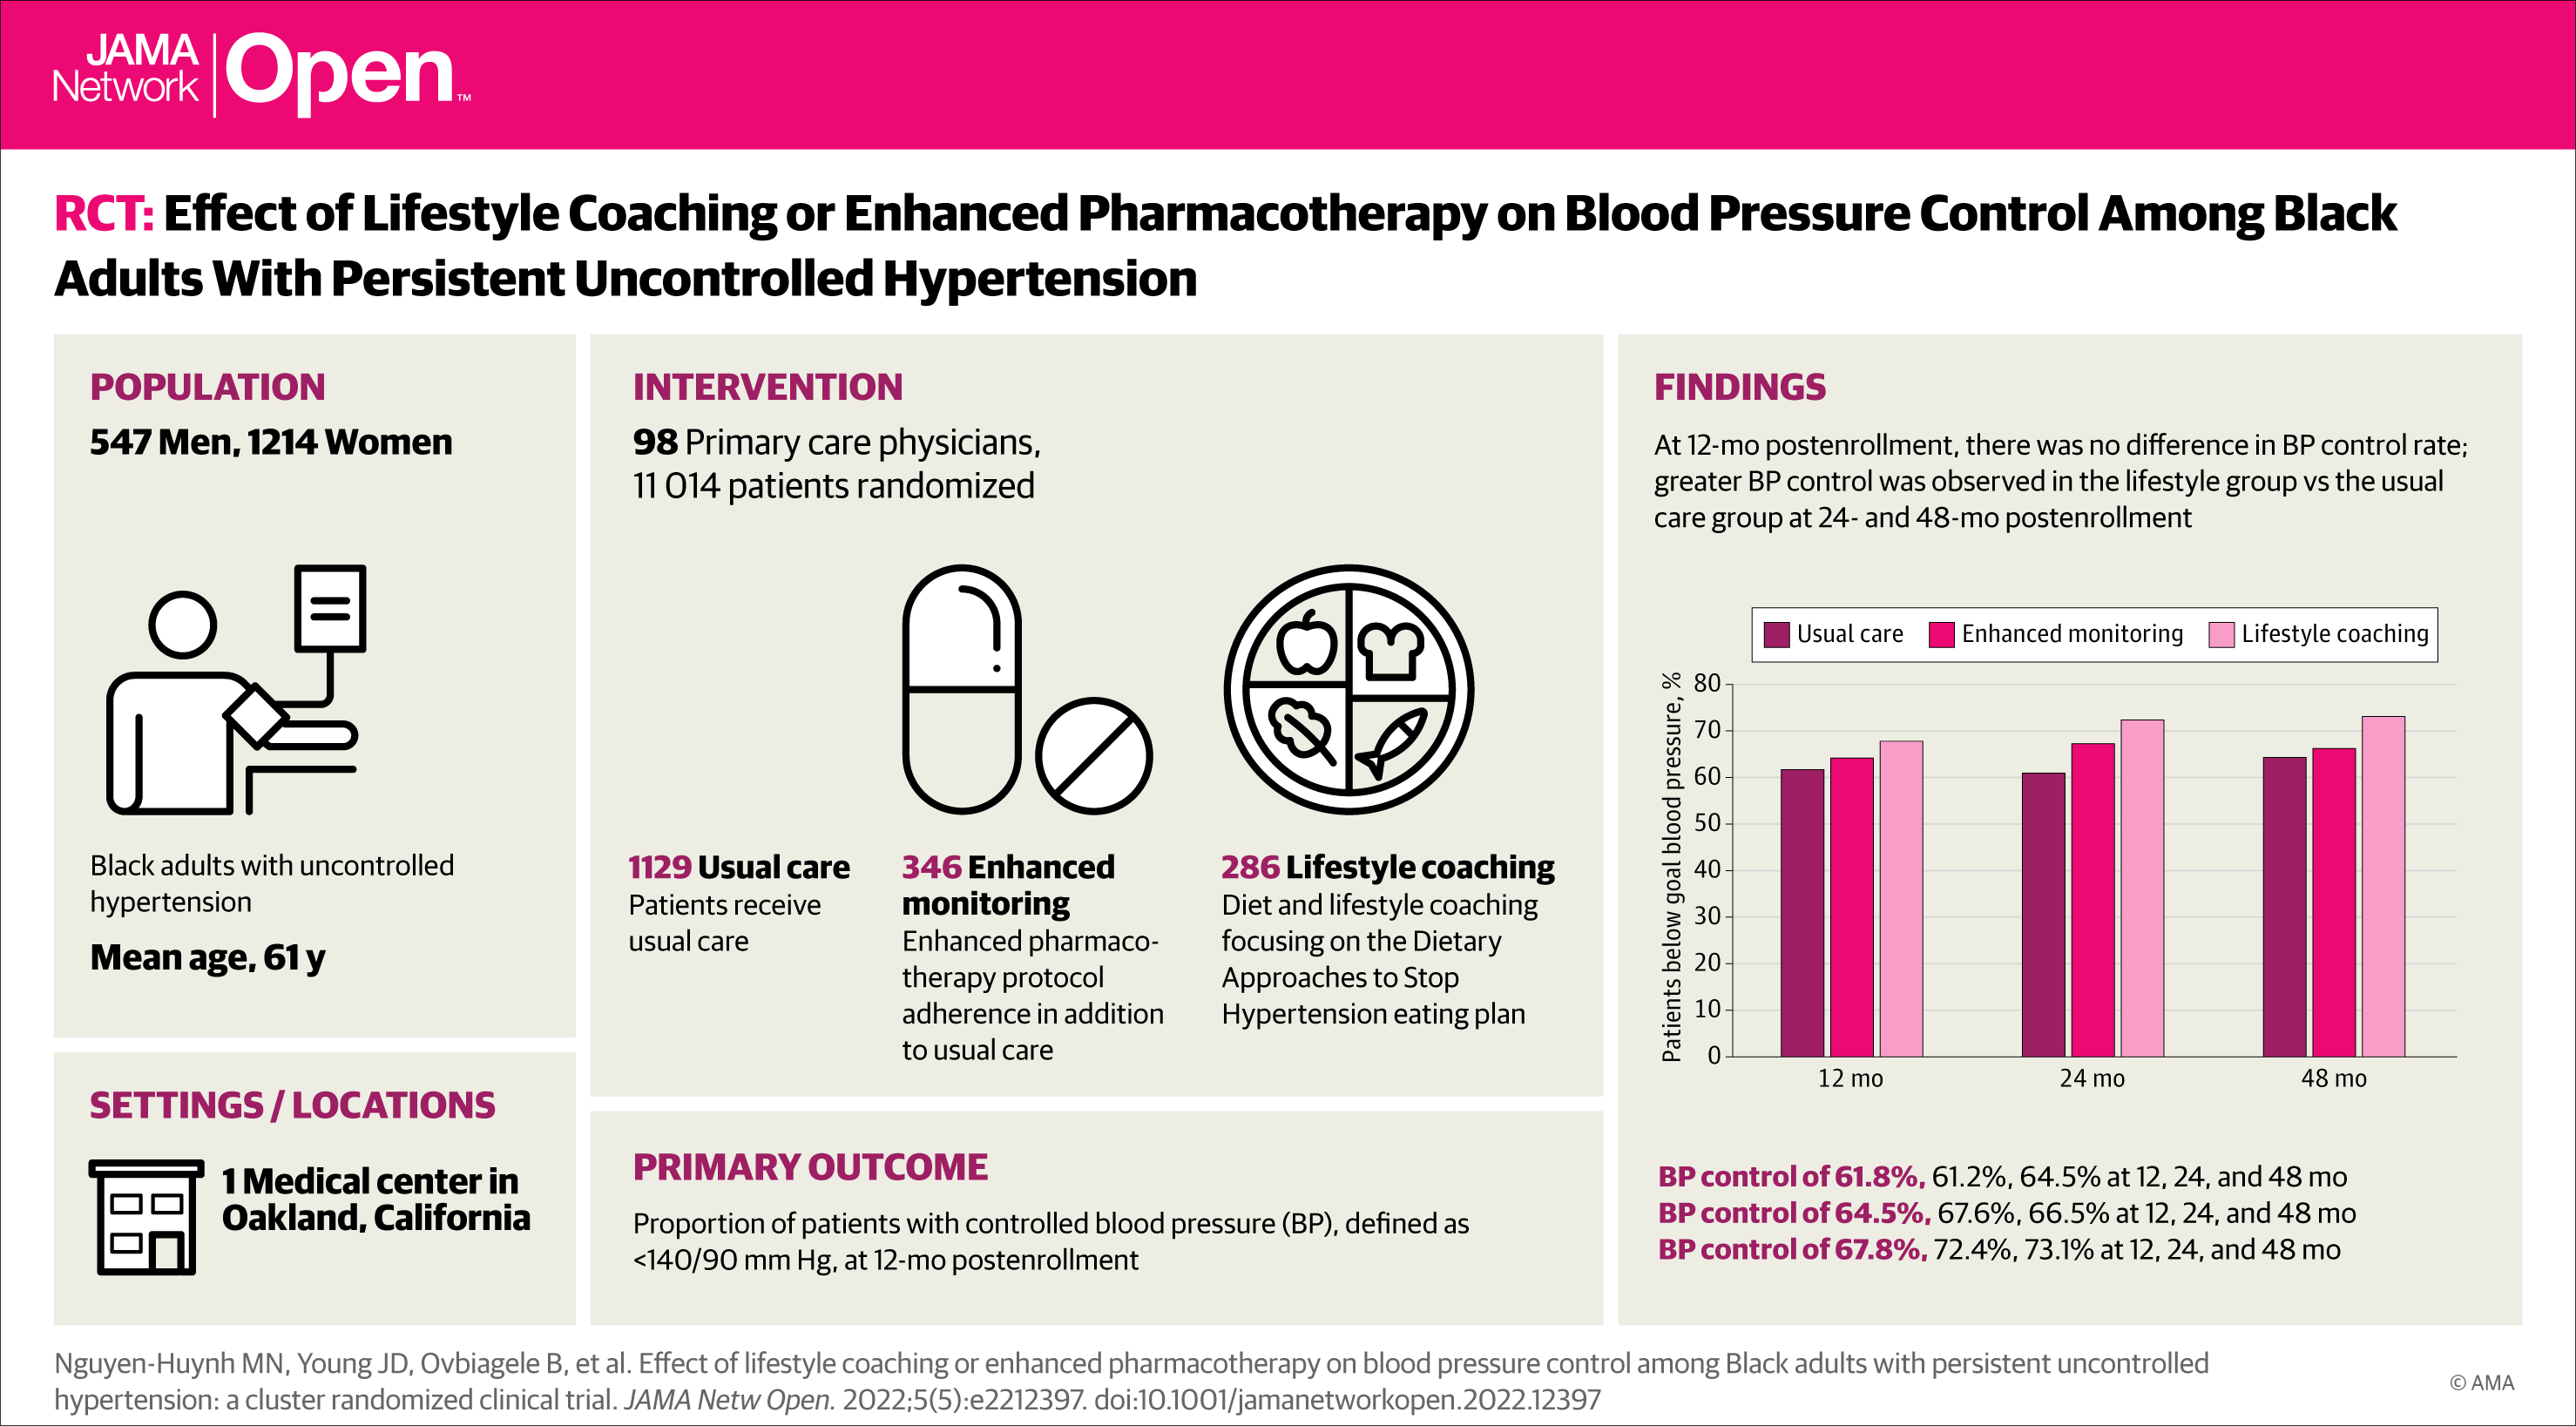 Visual Abstract. RCT: Effect of Lifestyle Coaching or Enhanced Pharmacotherapy on Blood Pressure Control Among Black Adults With Persistent Uncontrolled Hypertension